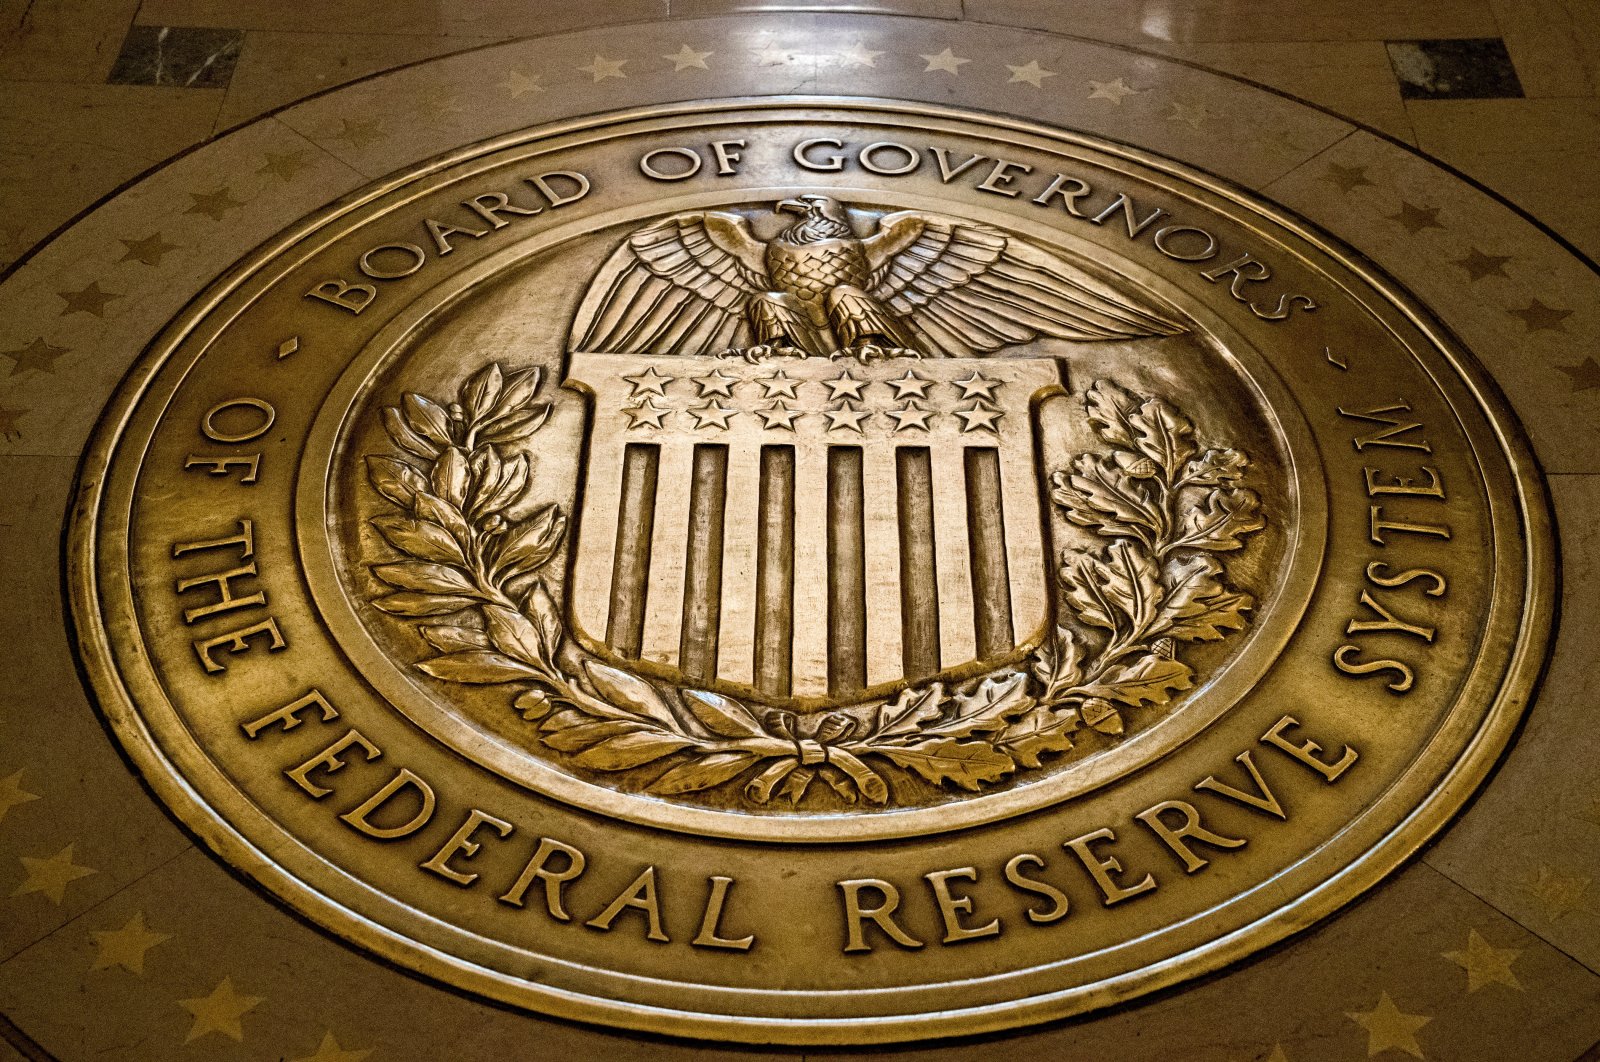 The seal of the Board of Governors of the U.S. Federal Reserve (Fed) is displayed in the ground at the Marriner S. Eccles Federal Reserve Board Building in Washington, U.S., Feb. 5, 2018. (AP Photo)